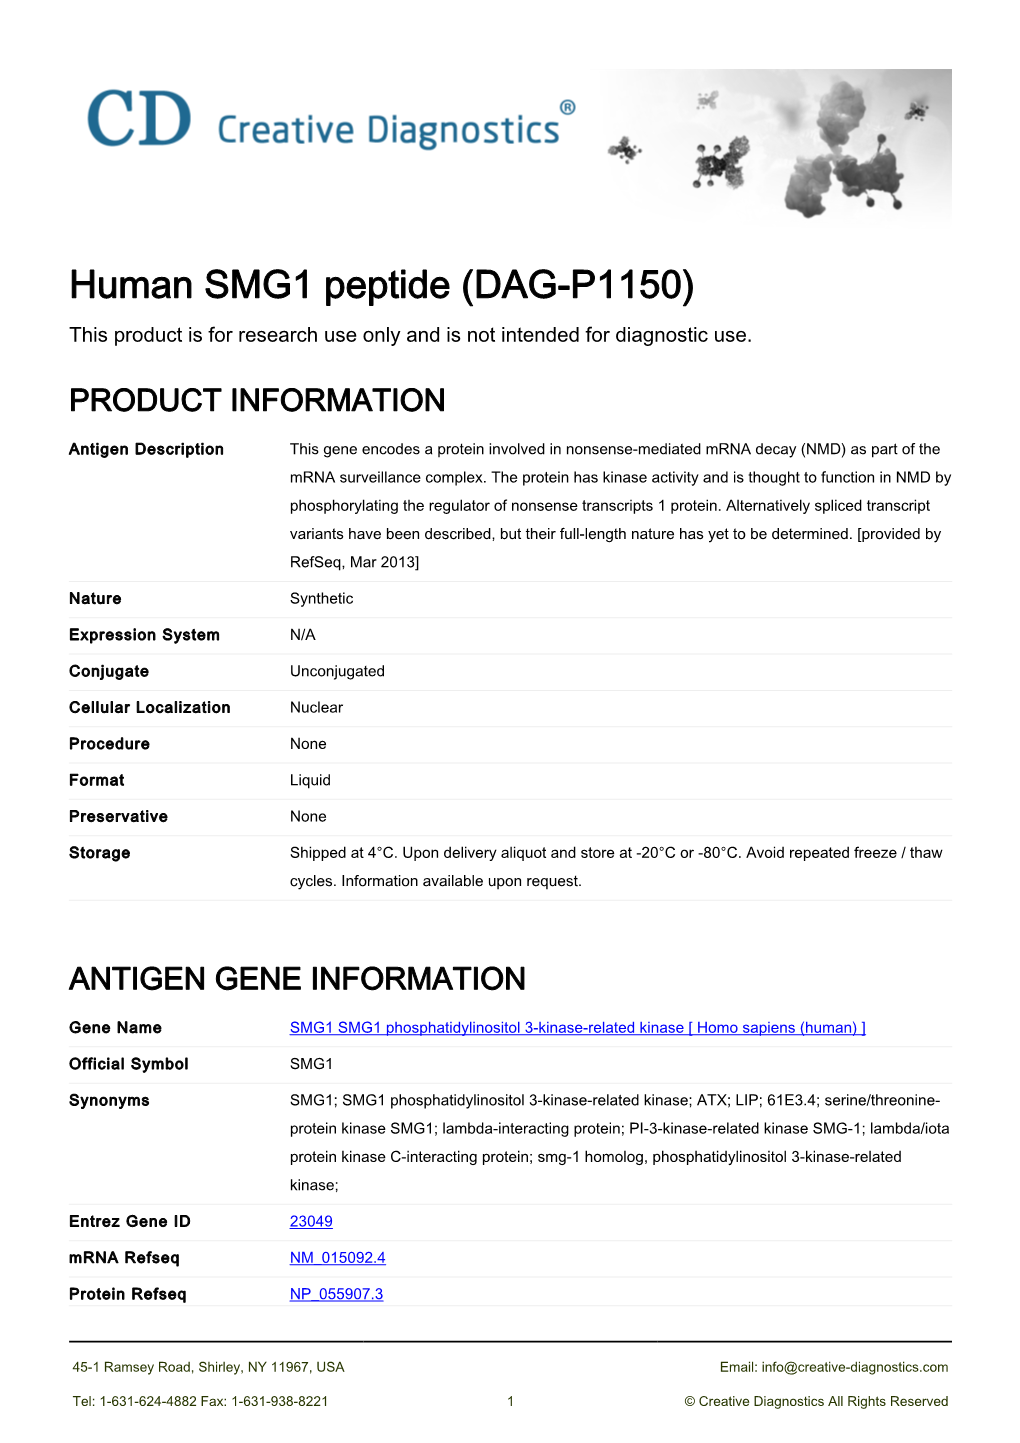 Human SMG1 Peptide (DAG-P1150) This Product Is for Research Use Only and Is Not Intended for Diagnostic Use